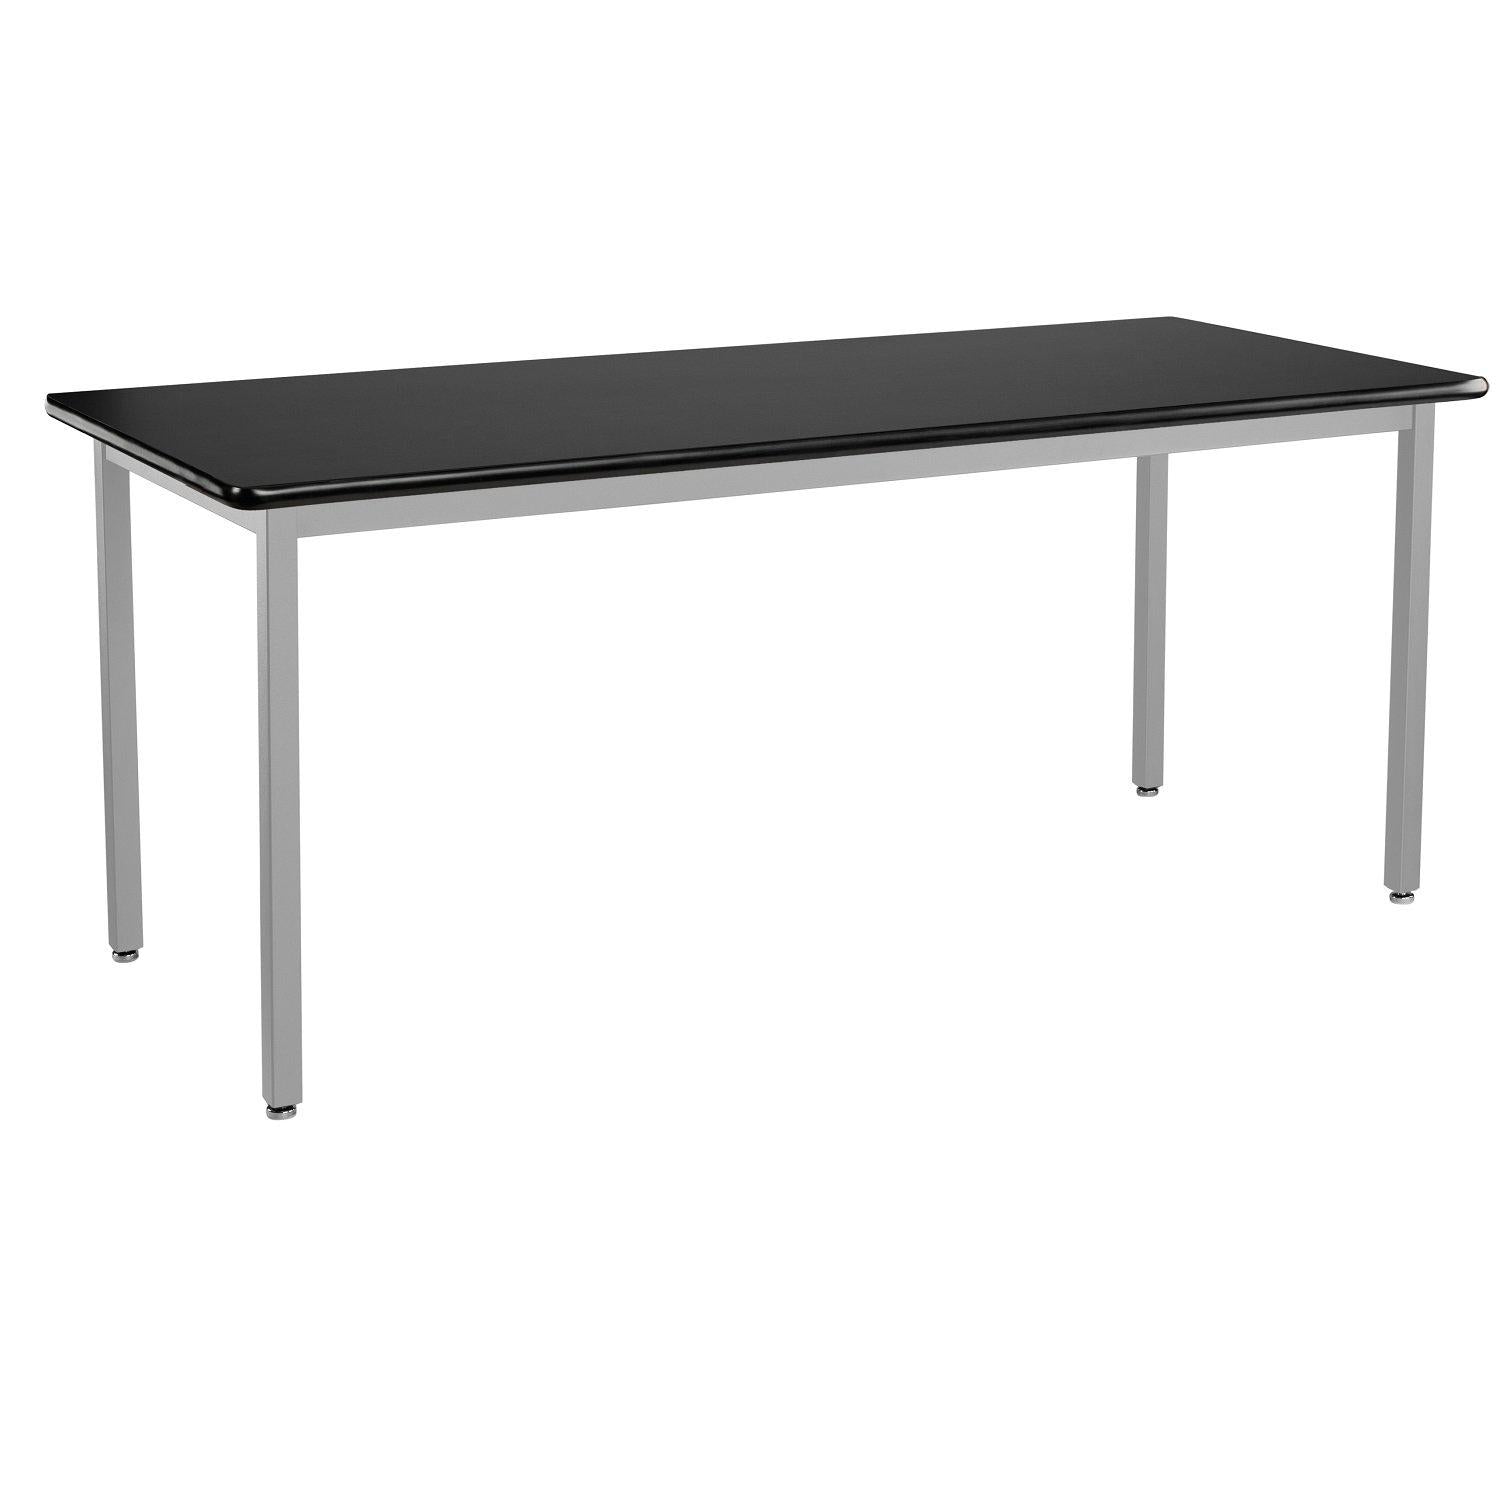 Heavy-Duty Fixed Height Utility Table, Soft Grey Frame, 30" x 72", High-Pressure Laminate Top with T-Mold Edge